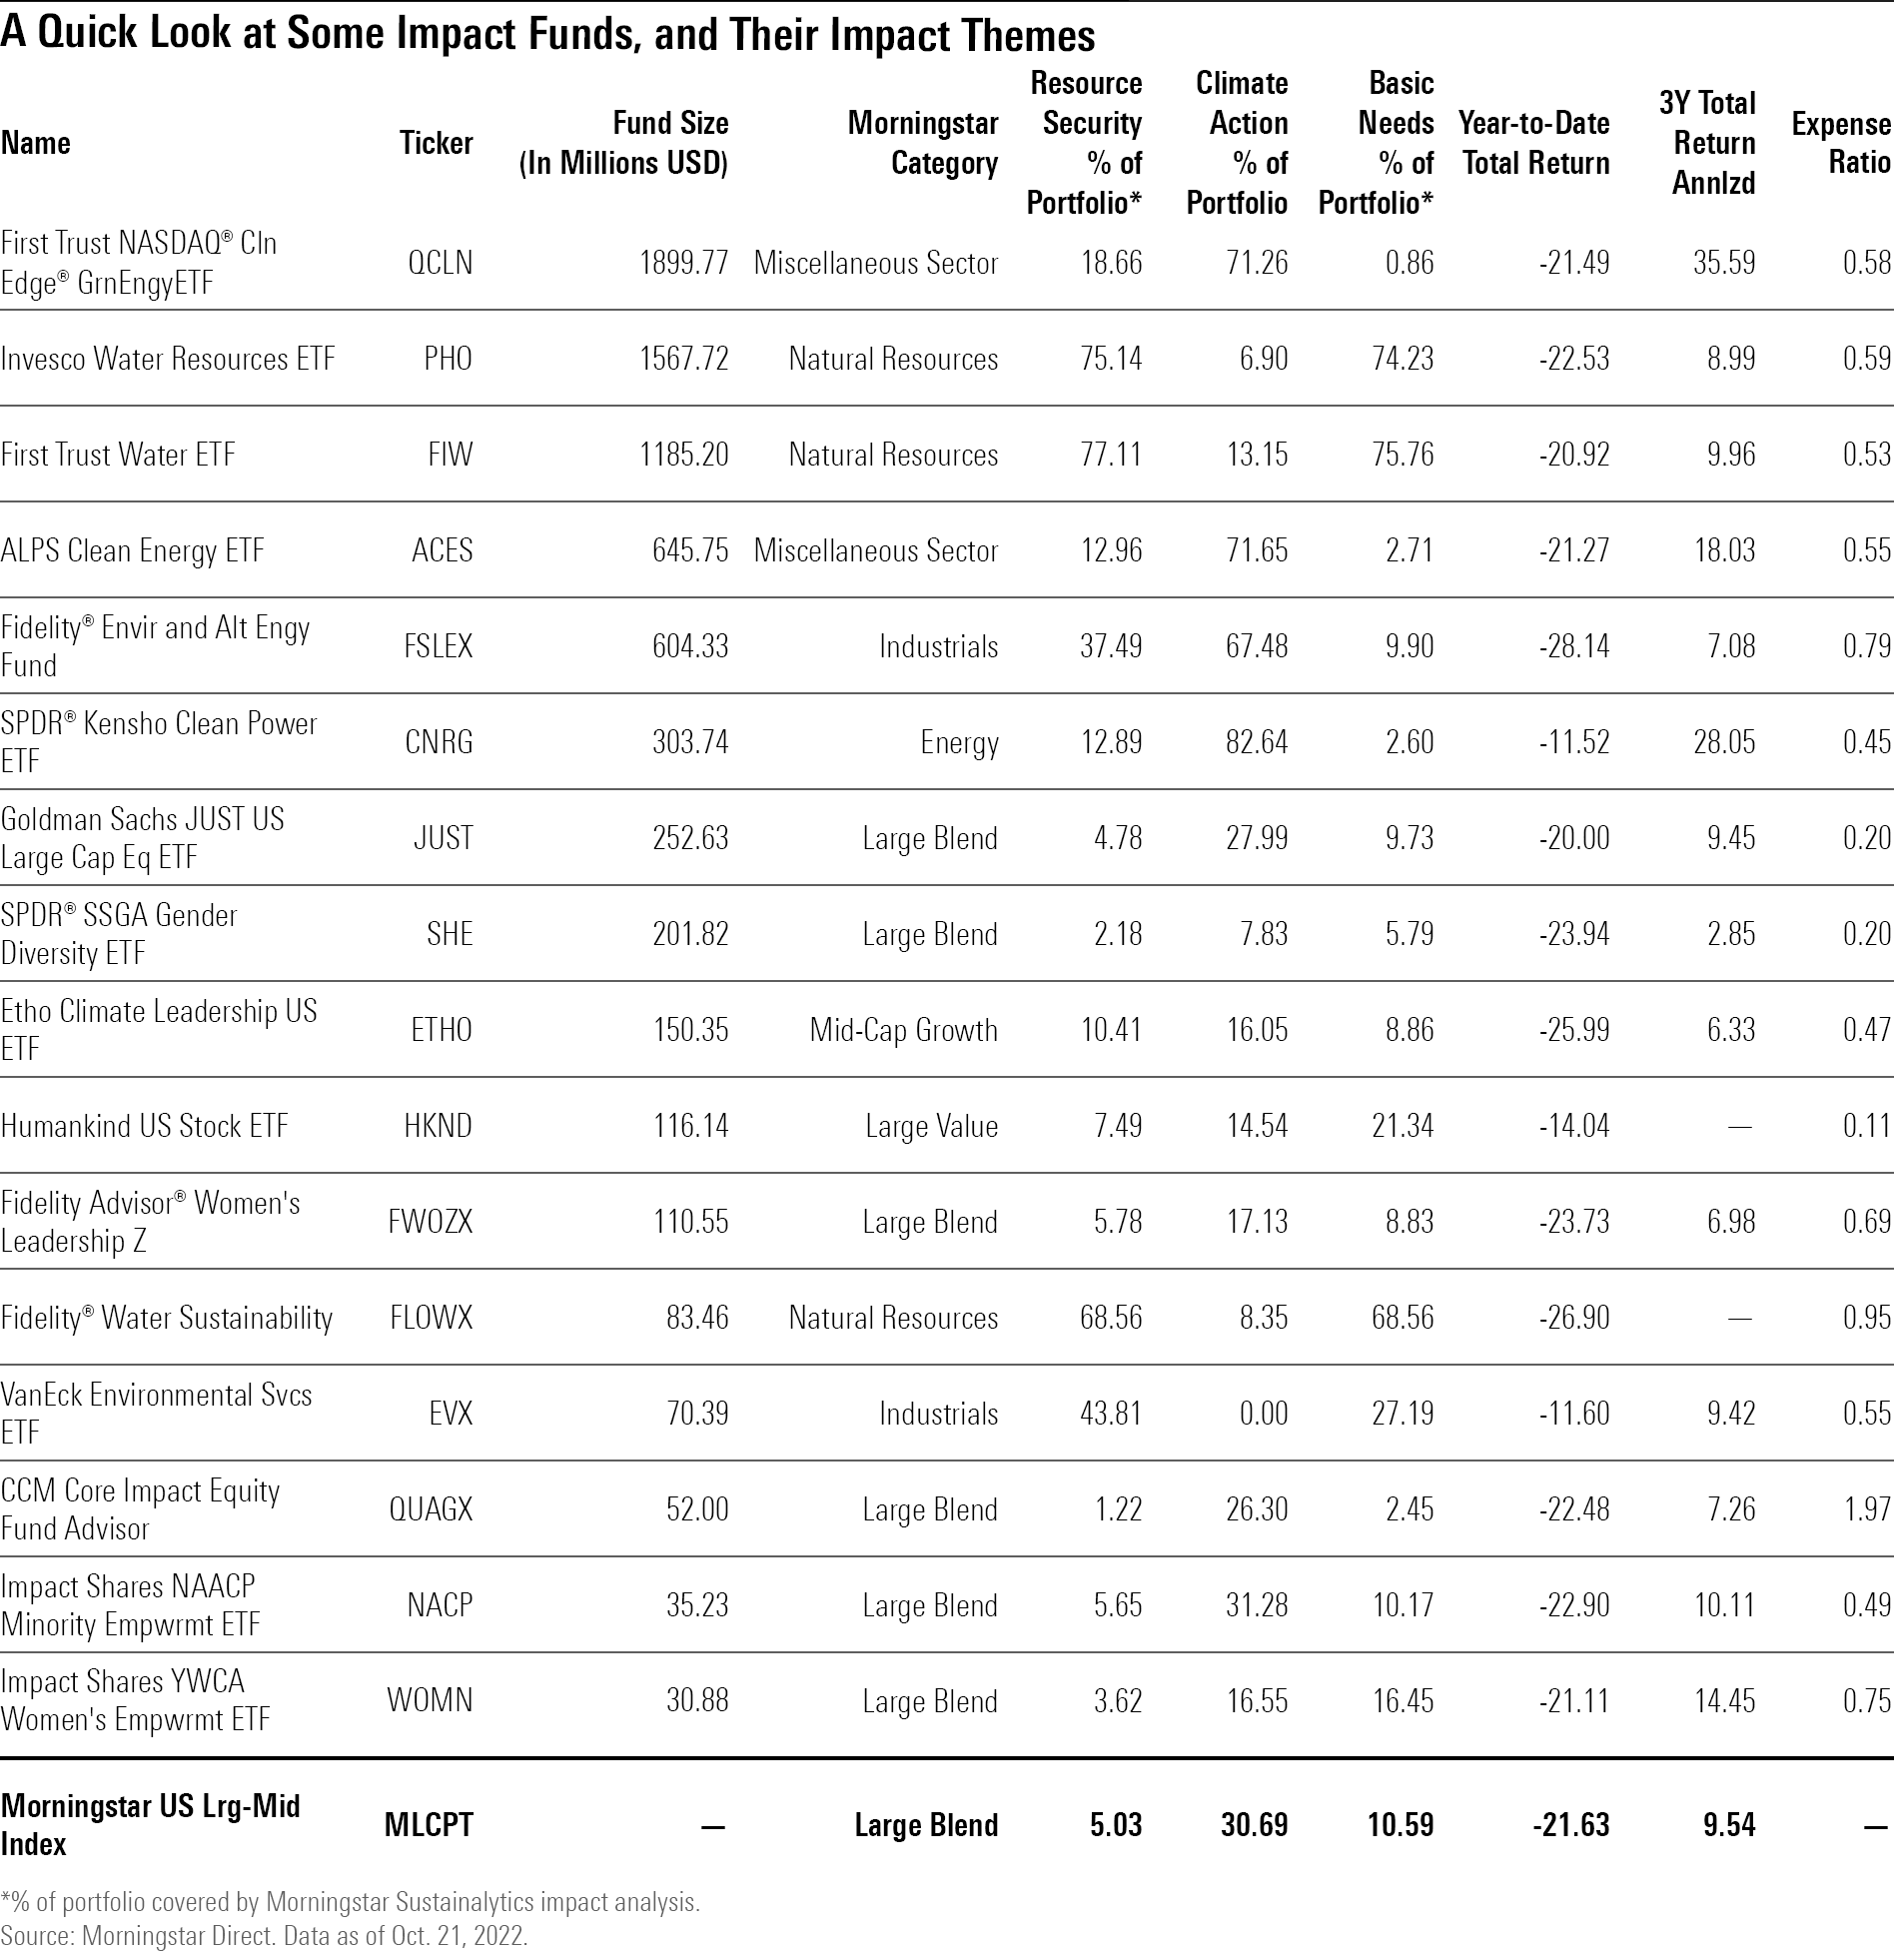 Table listing 16 impact funds, their fund sizes, and the percentage of their portfolios dedicated to resource security, climate action, and basic needs.